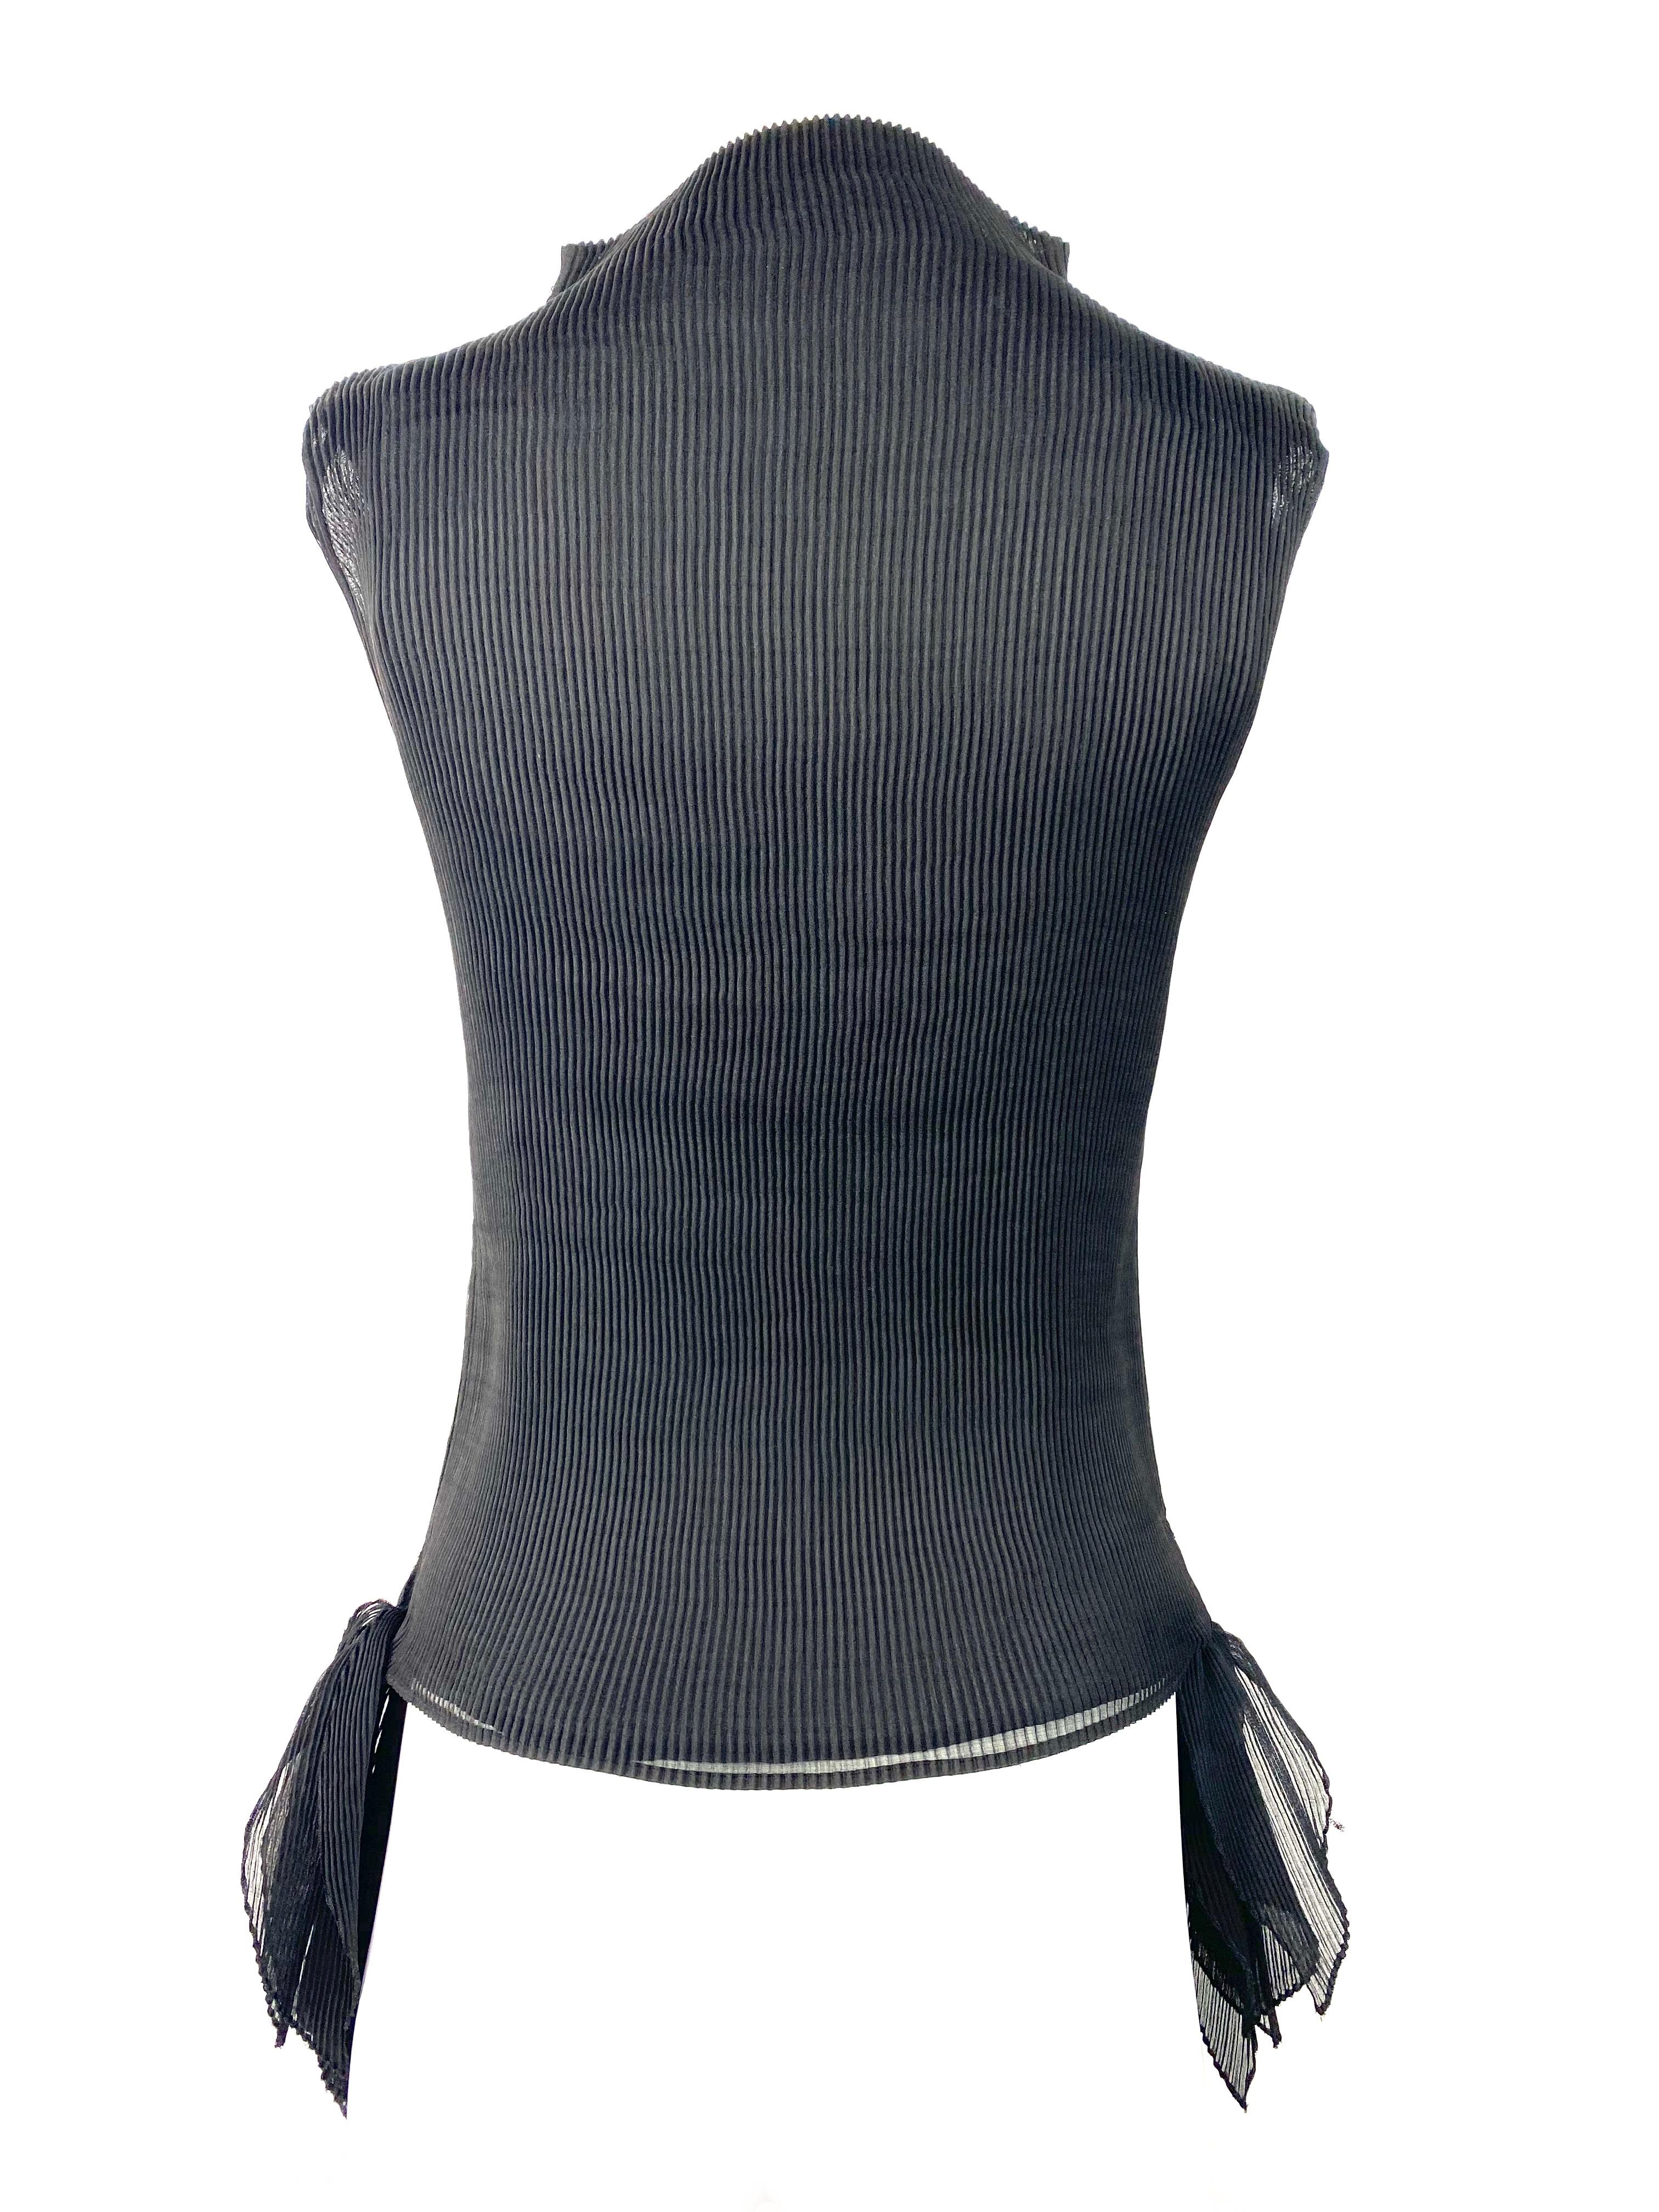 Women's or Men's Issey Miyake Black Sleeveless Top Size 2  For Sale